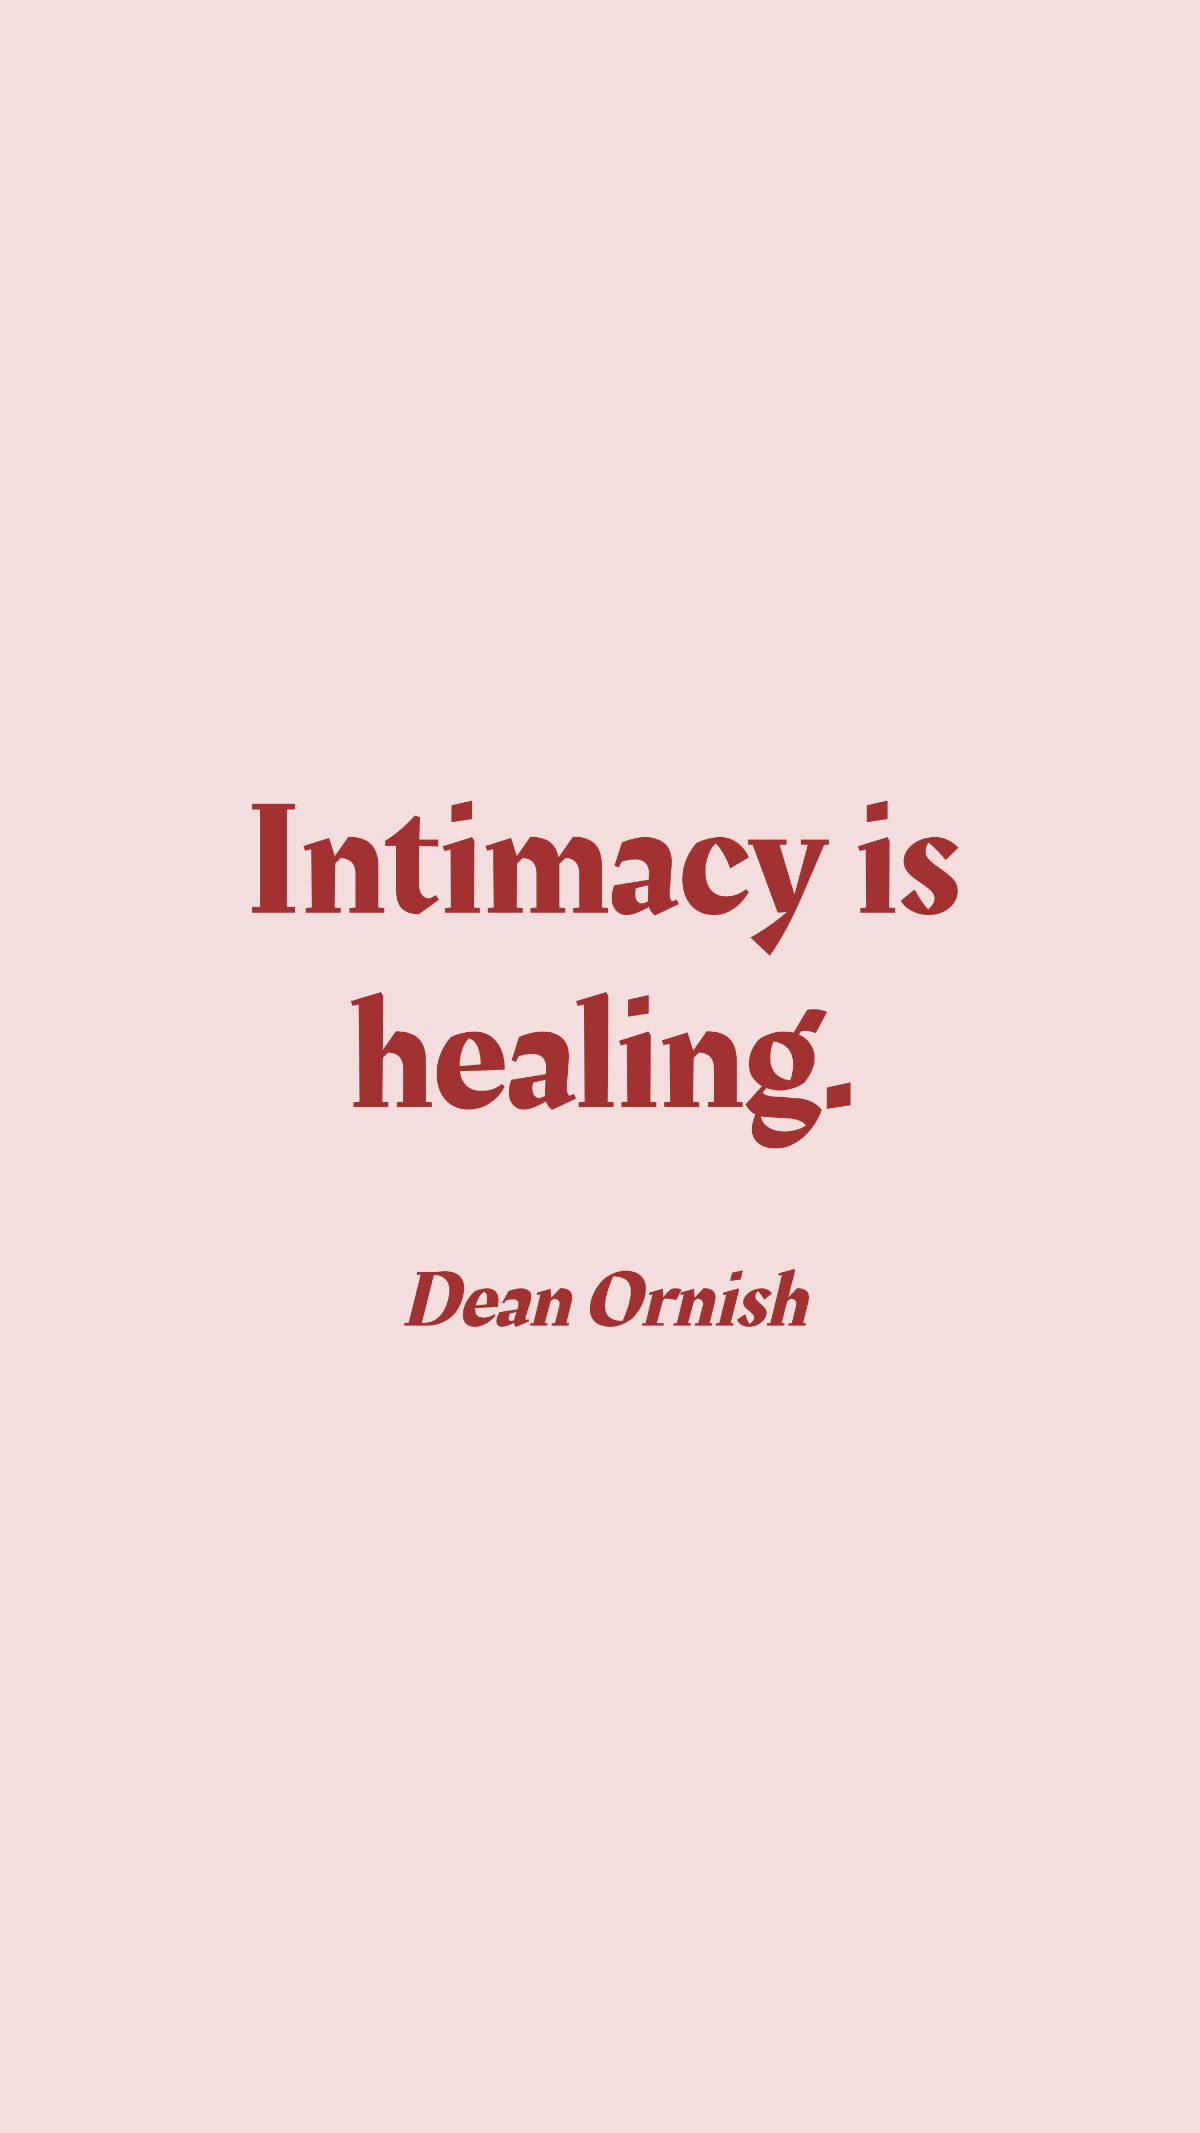 Dean Ornish - Intimacy is healing. Template